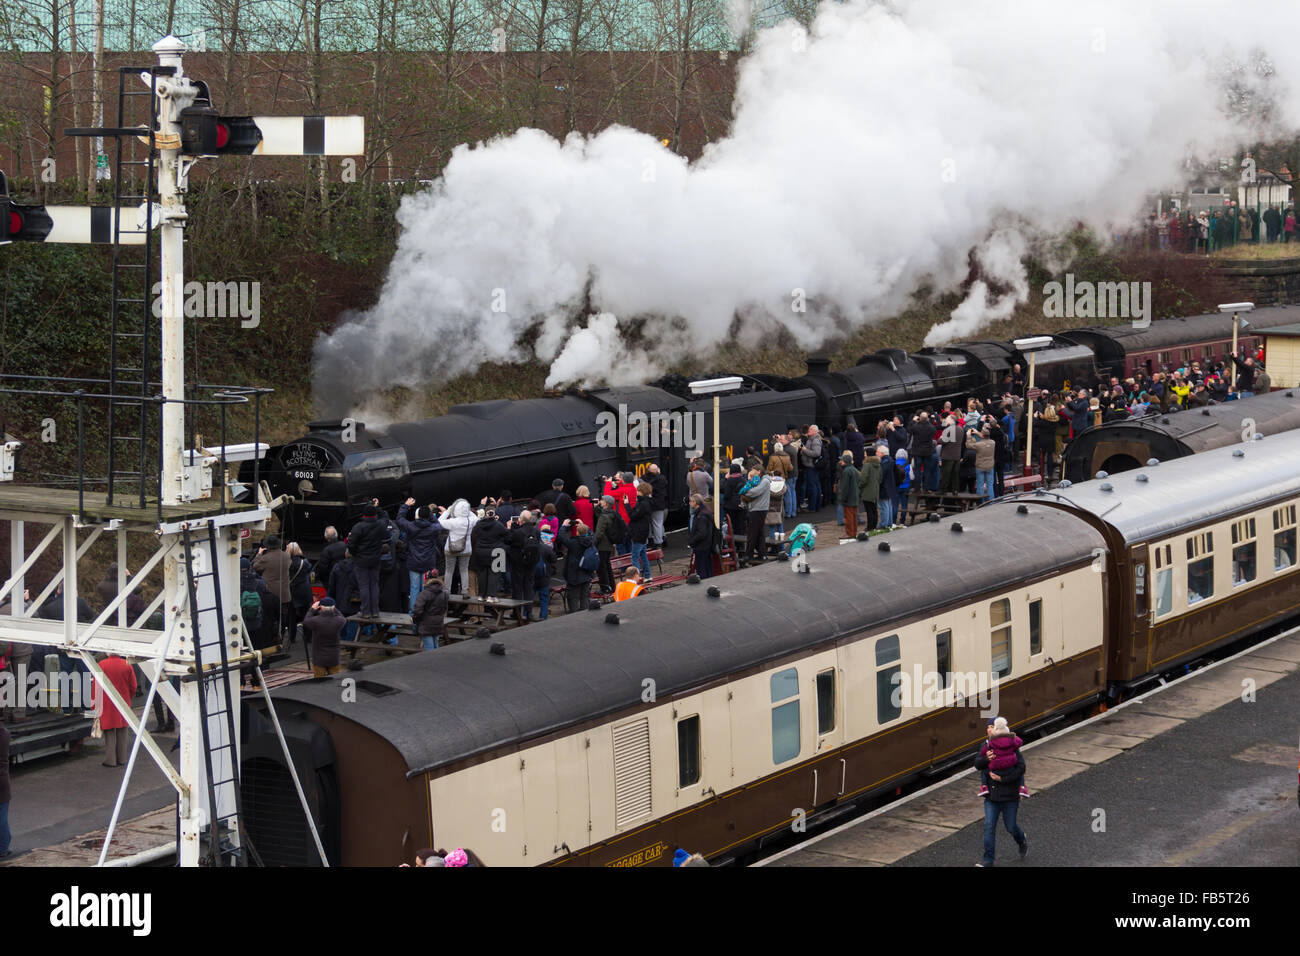 Bury, Lancashire. 10 January 2016. Flying Scotsman, the famous British steam locomotive built in 1923, newly out of the Riley and Son's Engineering works after its £4.2 million rebuild, continues its trial runs on the East Lancashire Railway at Bury, watched by hundreds of train enthusiasts. The engine, still in its wartime black livery, has further trial runs in Bury next week prior to a high speed run on the west coast main line. Credit:  Joseph Clemson 1/Alamy Live News Stock Photo